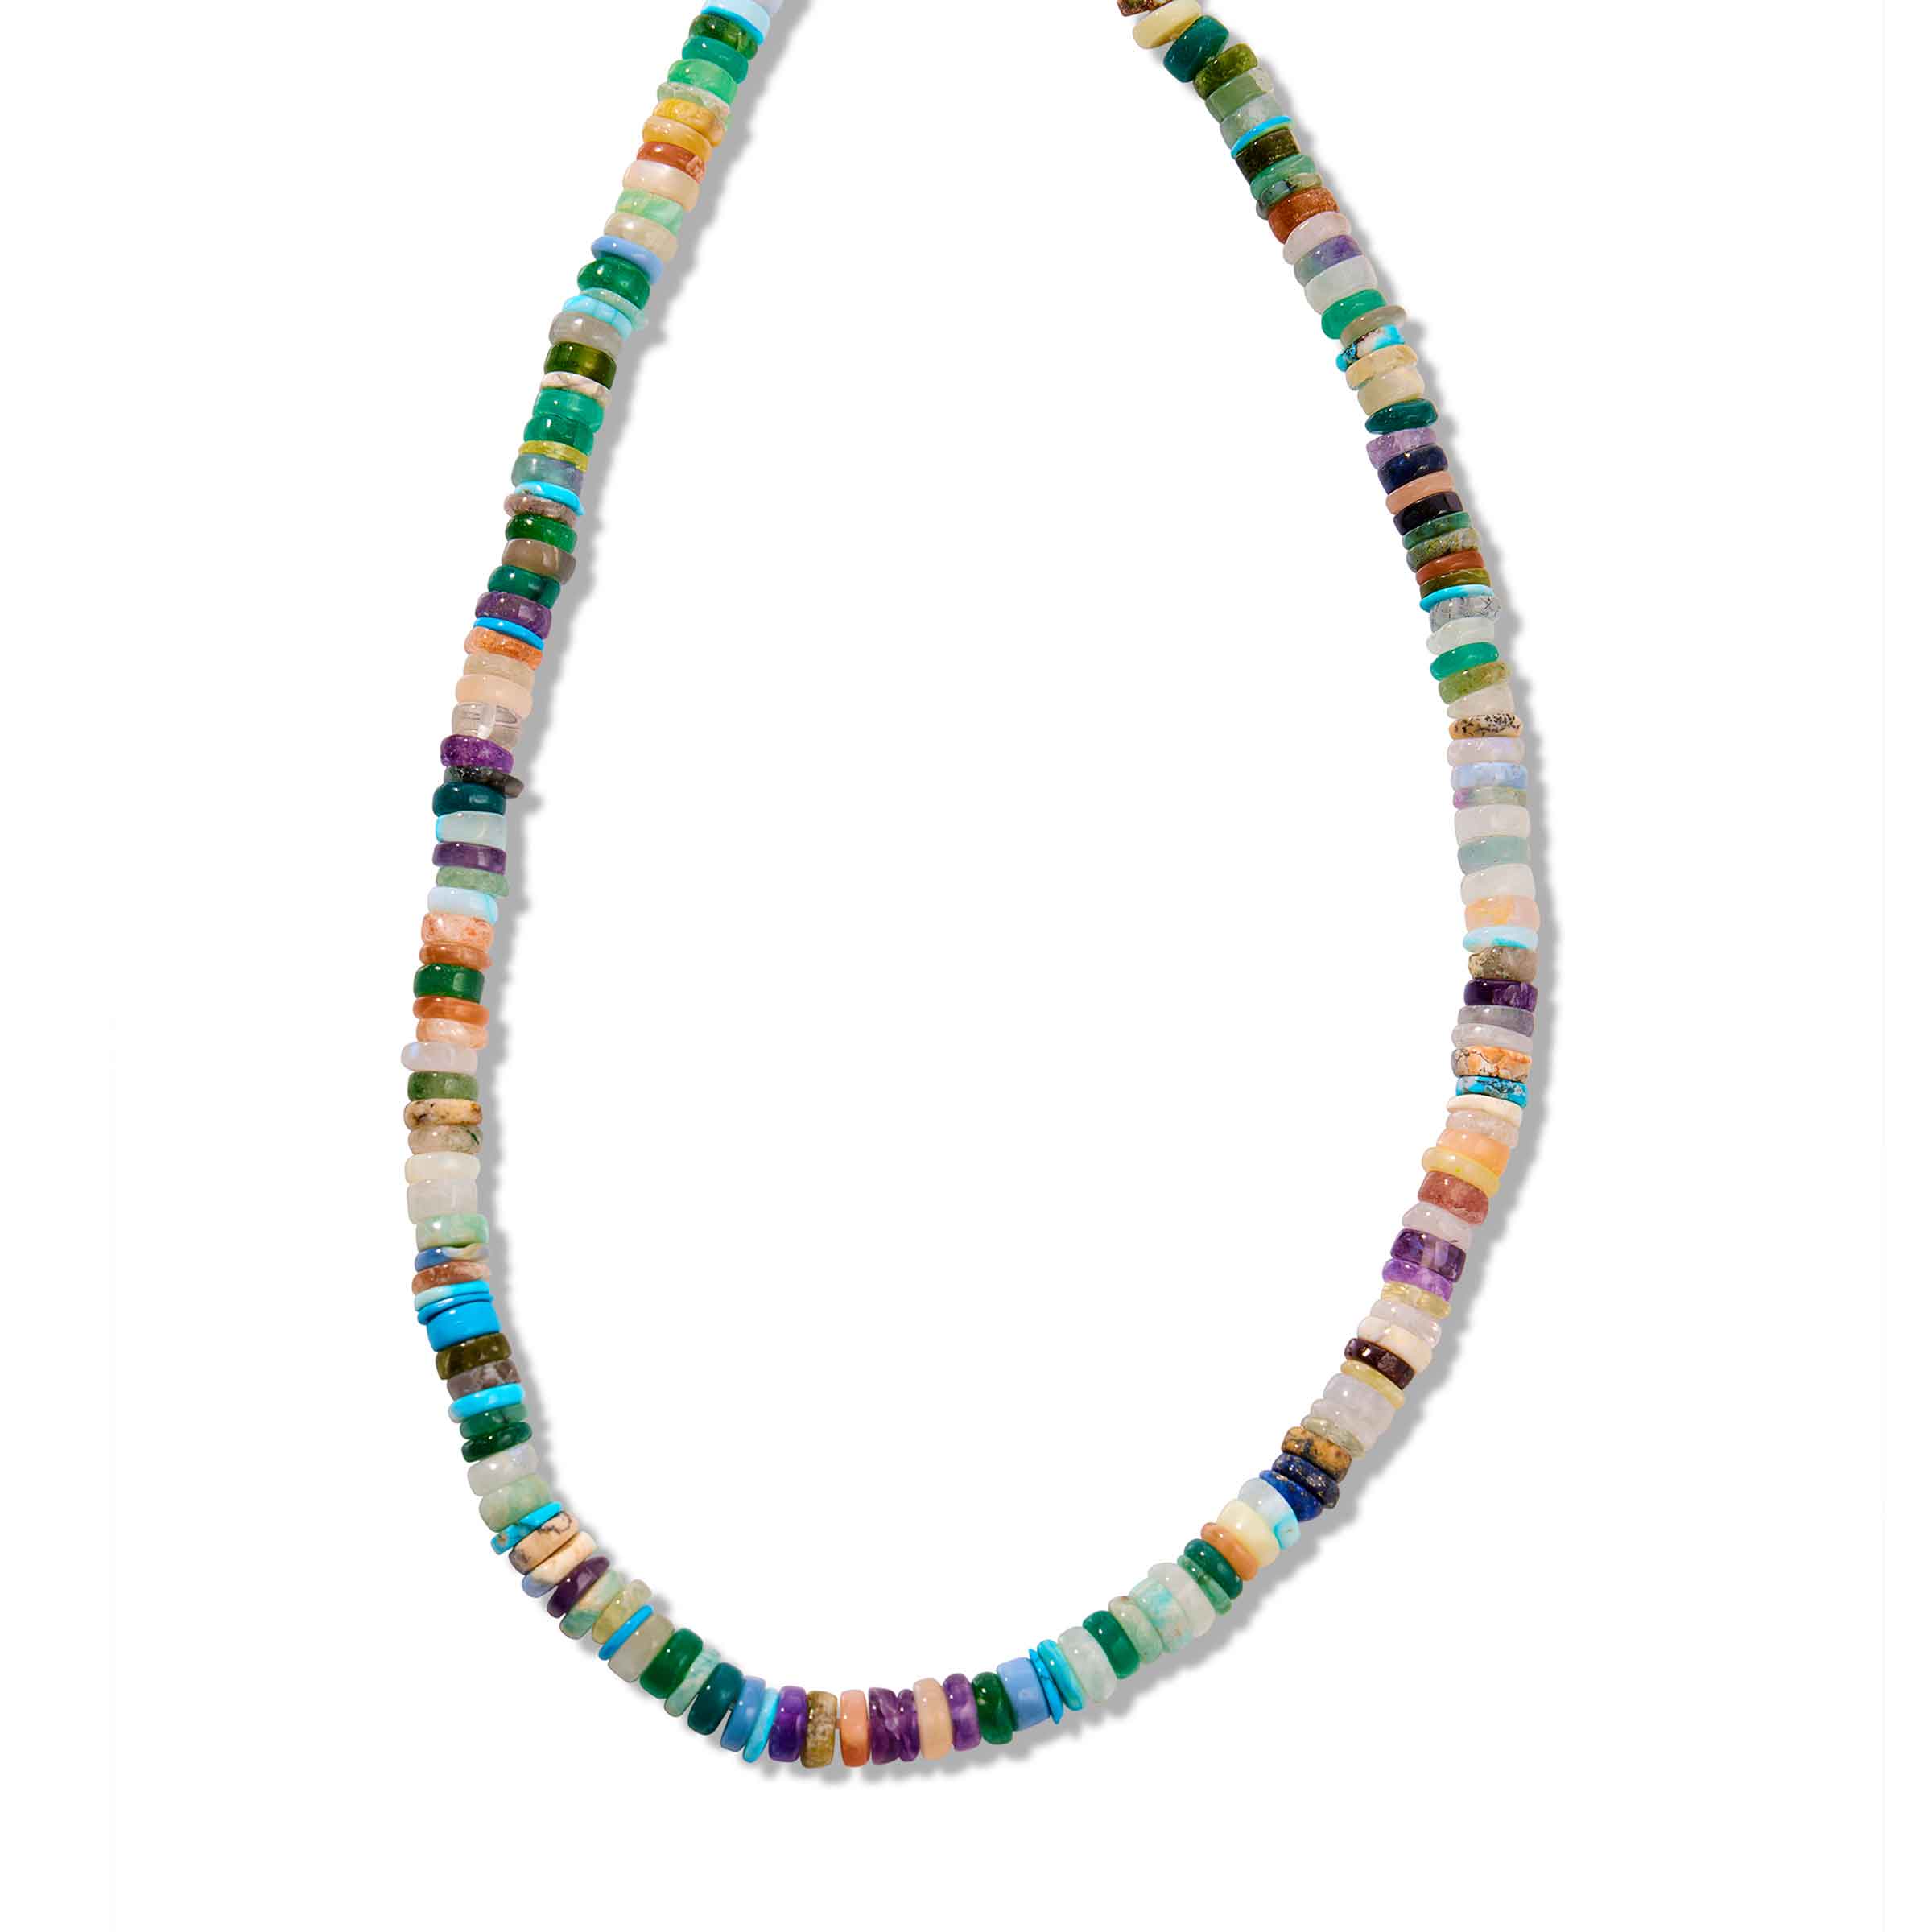 HELLA FAISHION Multi Layered Beads Necklace For Women